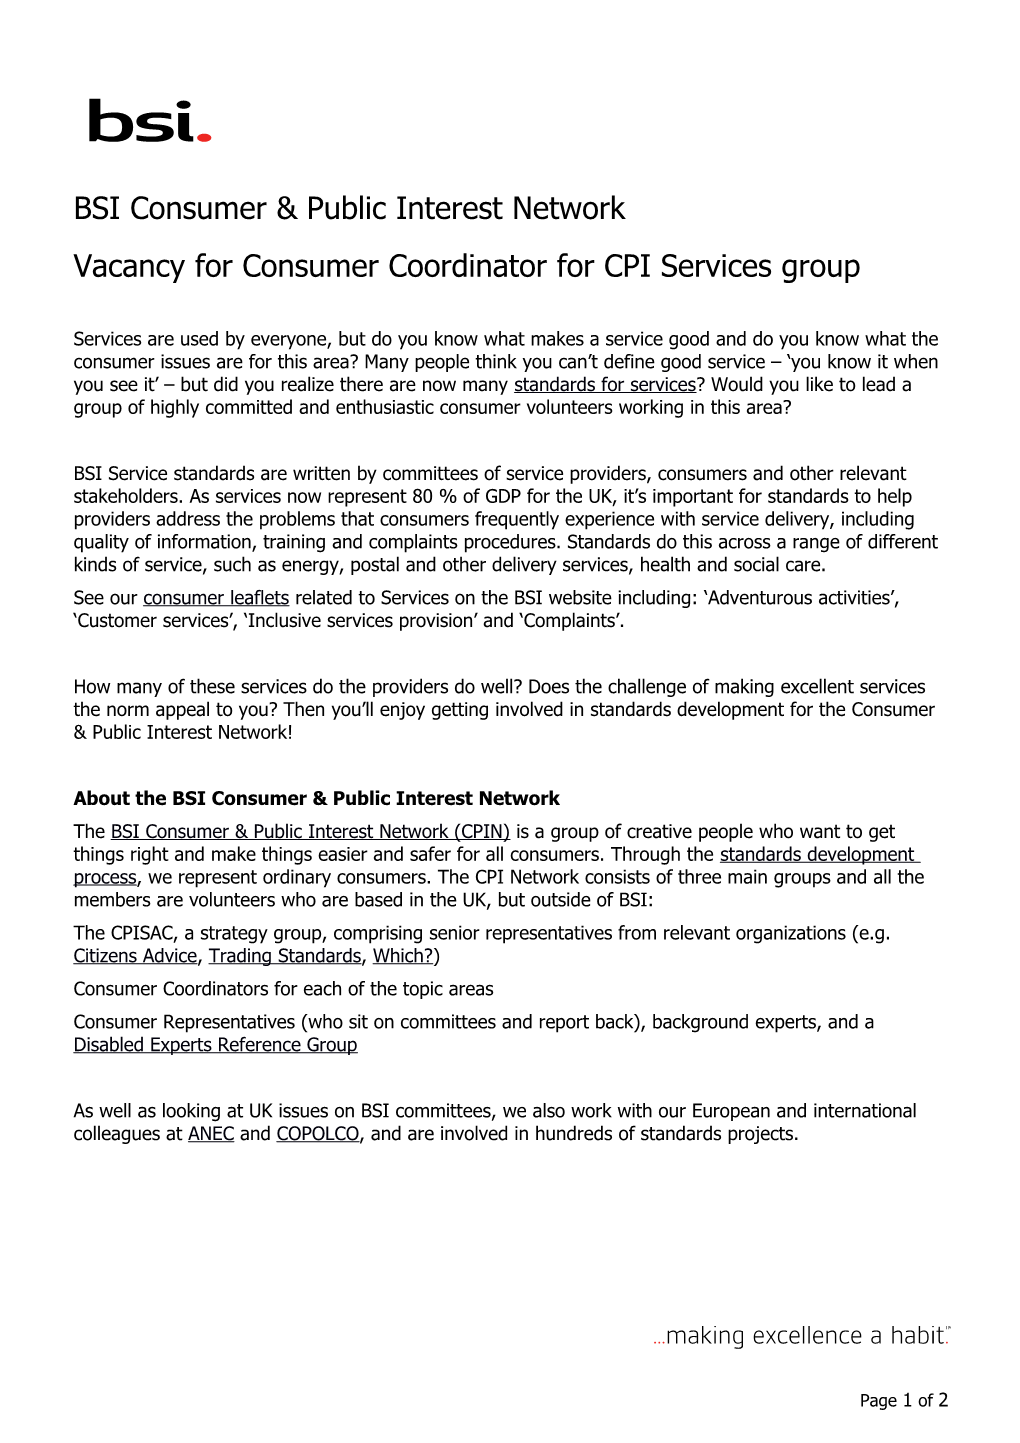 Vacancy for Consumer Coordinator for CPI Services Group